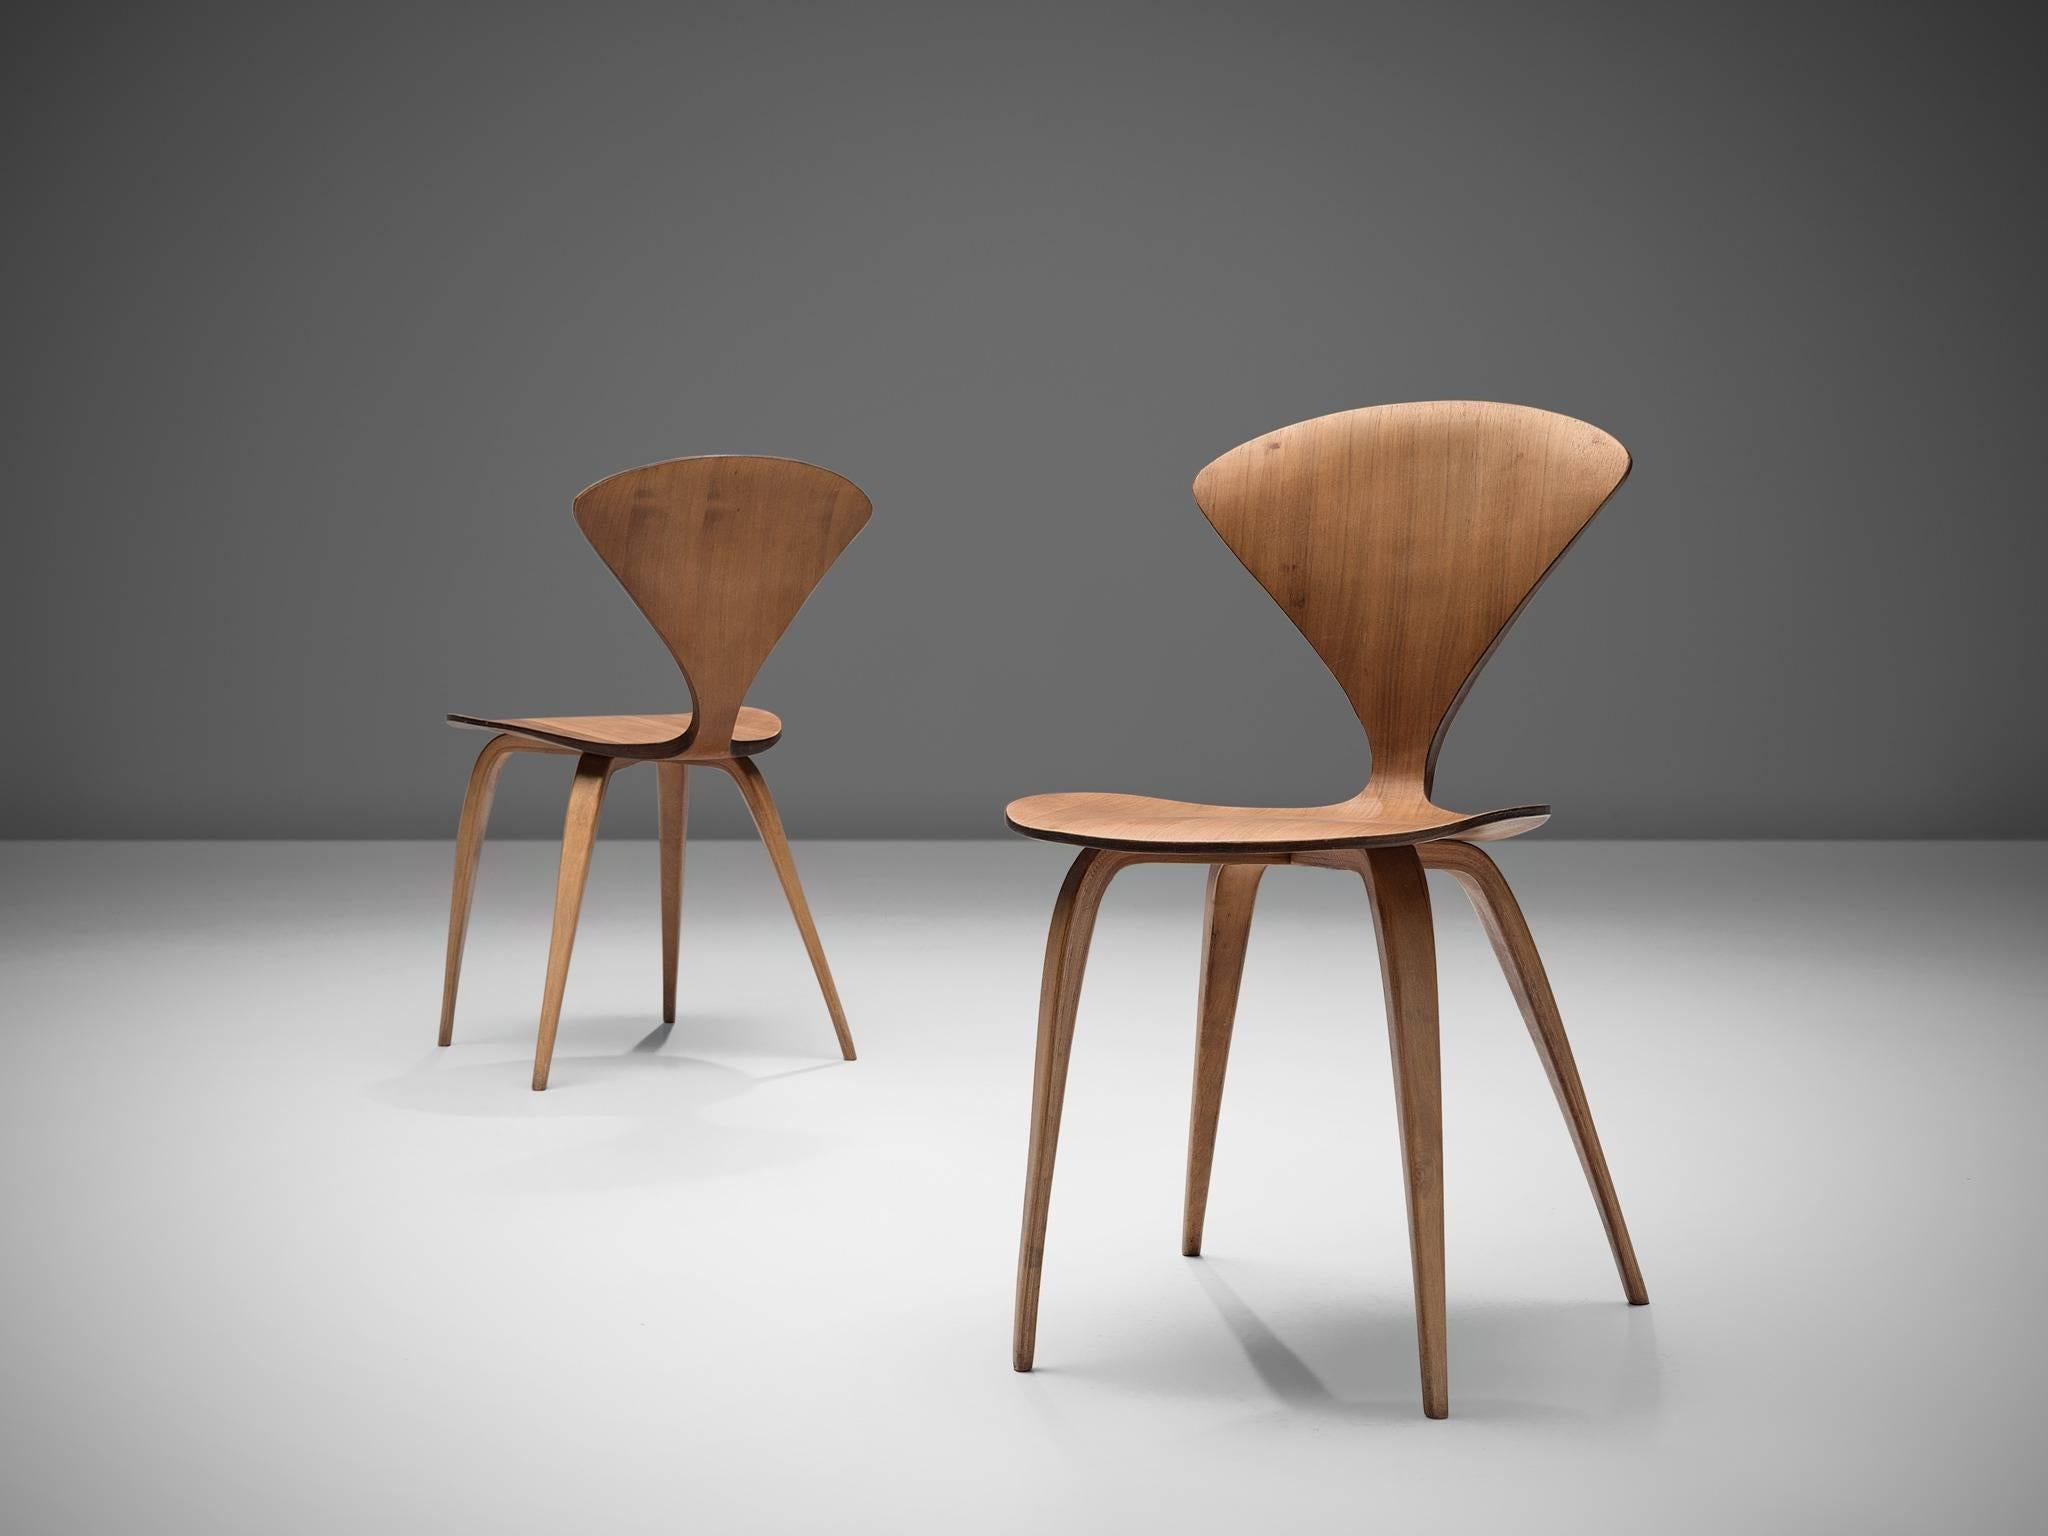 Norman Cherner for Plycraft, set of two side or dining chairs, walnut and plywood, United States 1957.

These two classic Norman Cherner plywood chairs date from 1957. Their iconic shape resembles something like a delicate butterfly, yet do not be